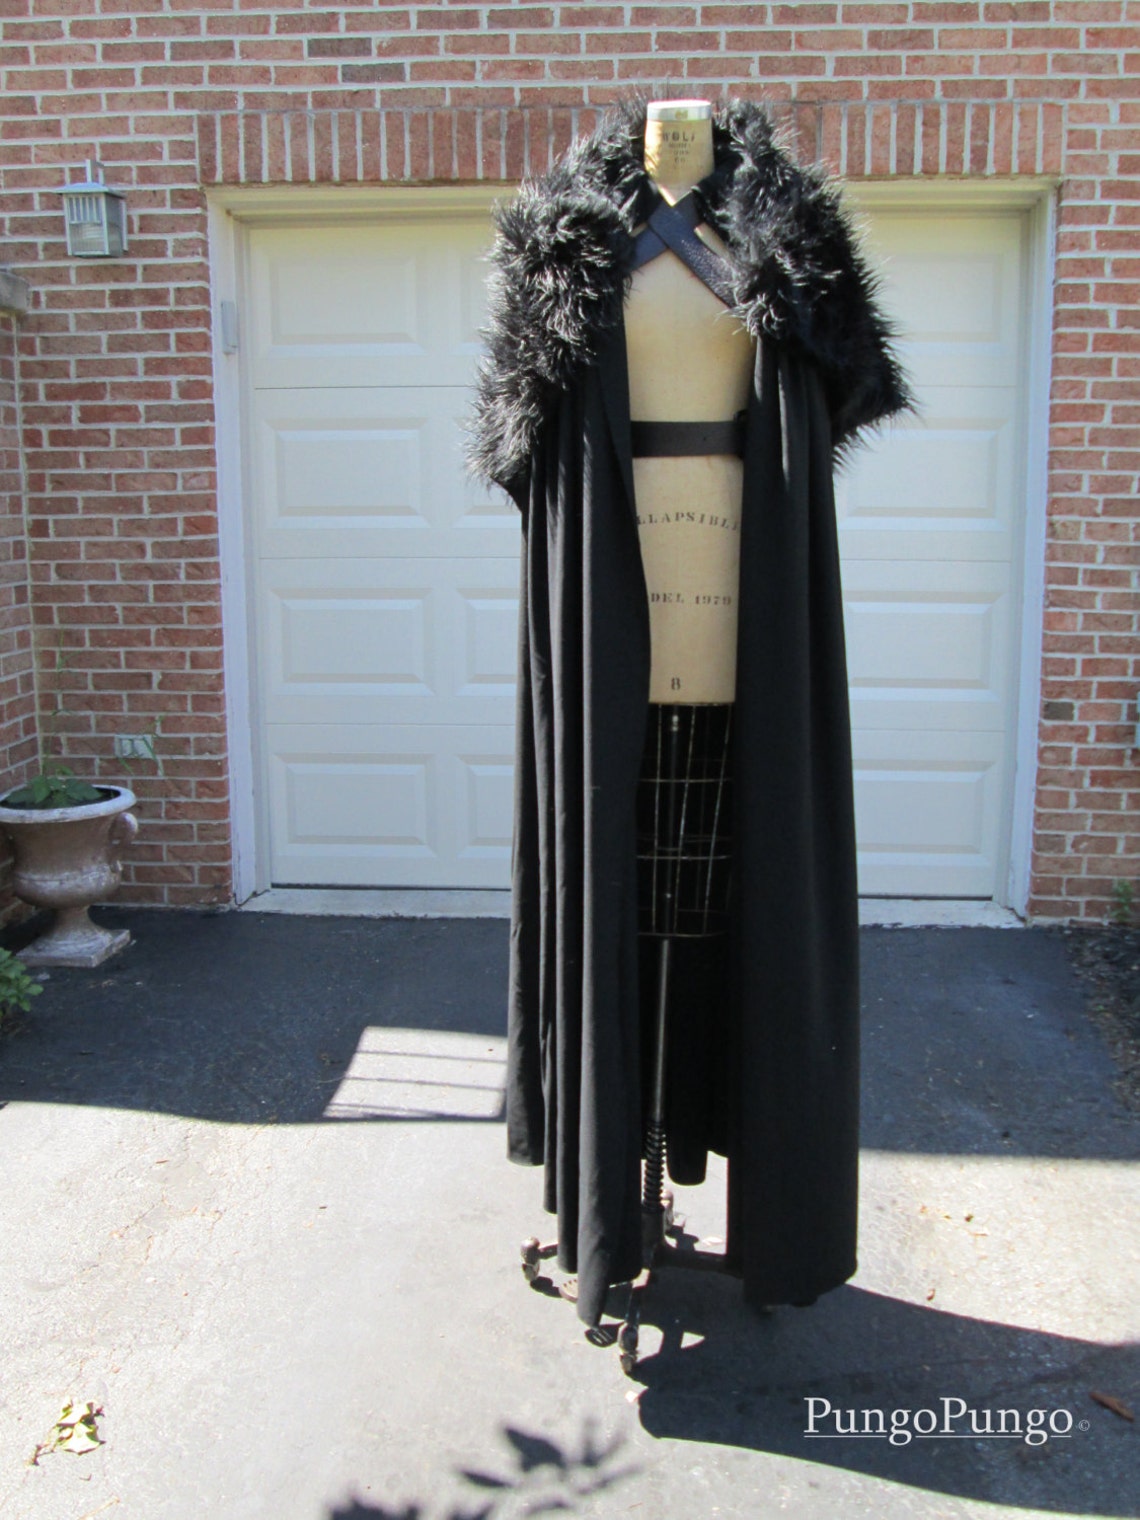 Jon Snow Cloak Any Color Game Of Thrones Costume Cape Etsy